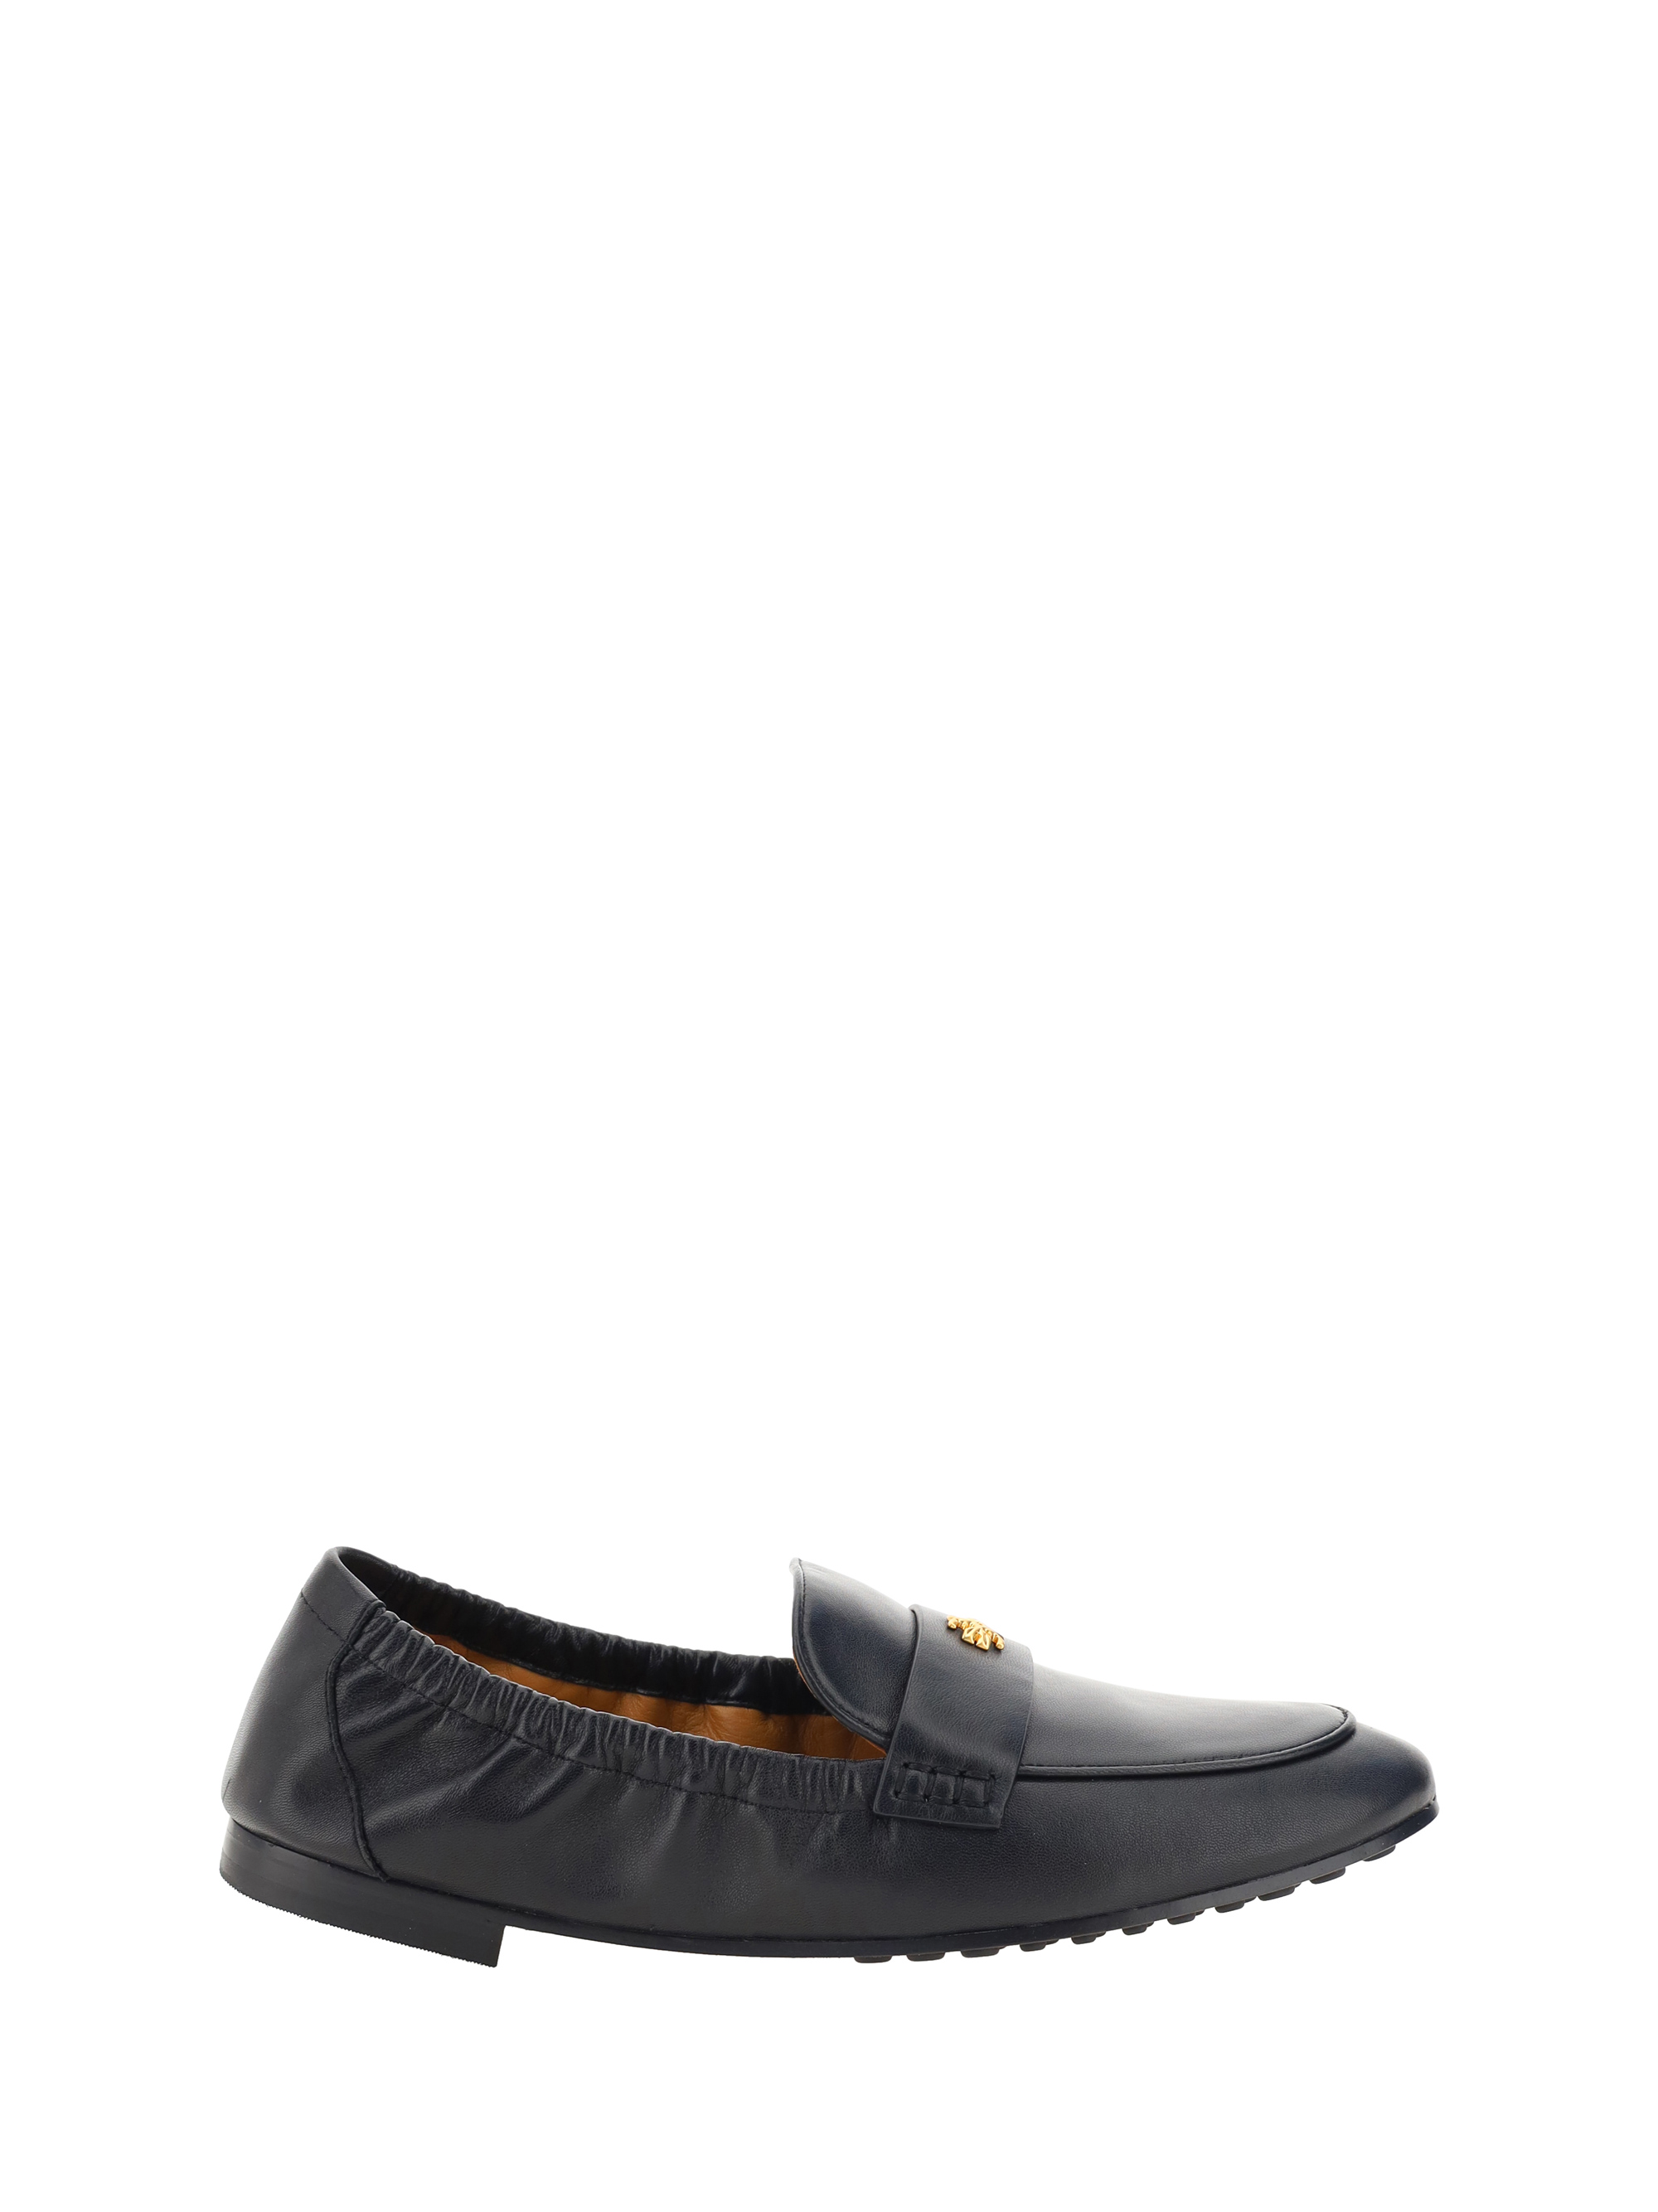 Tory Burch Loafers In Perfect Black/gold